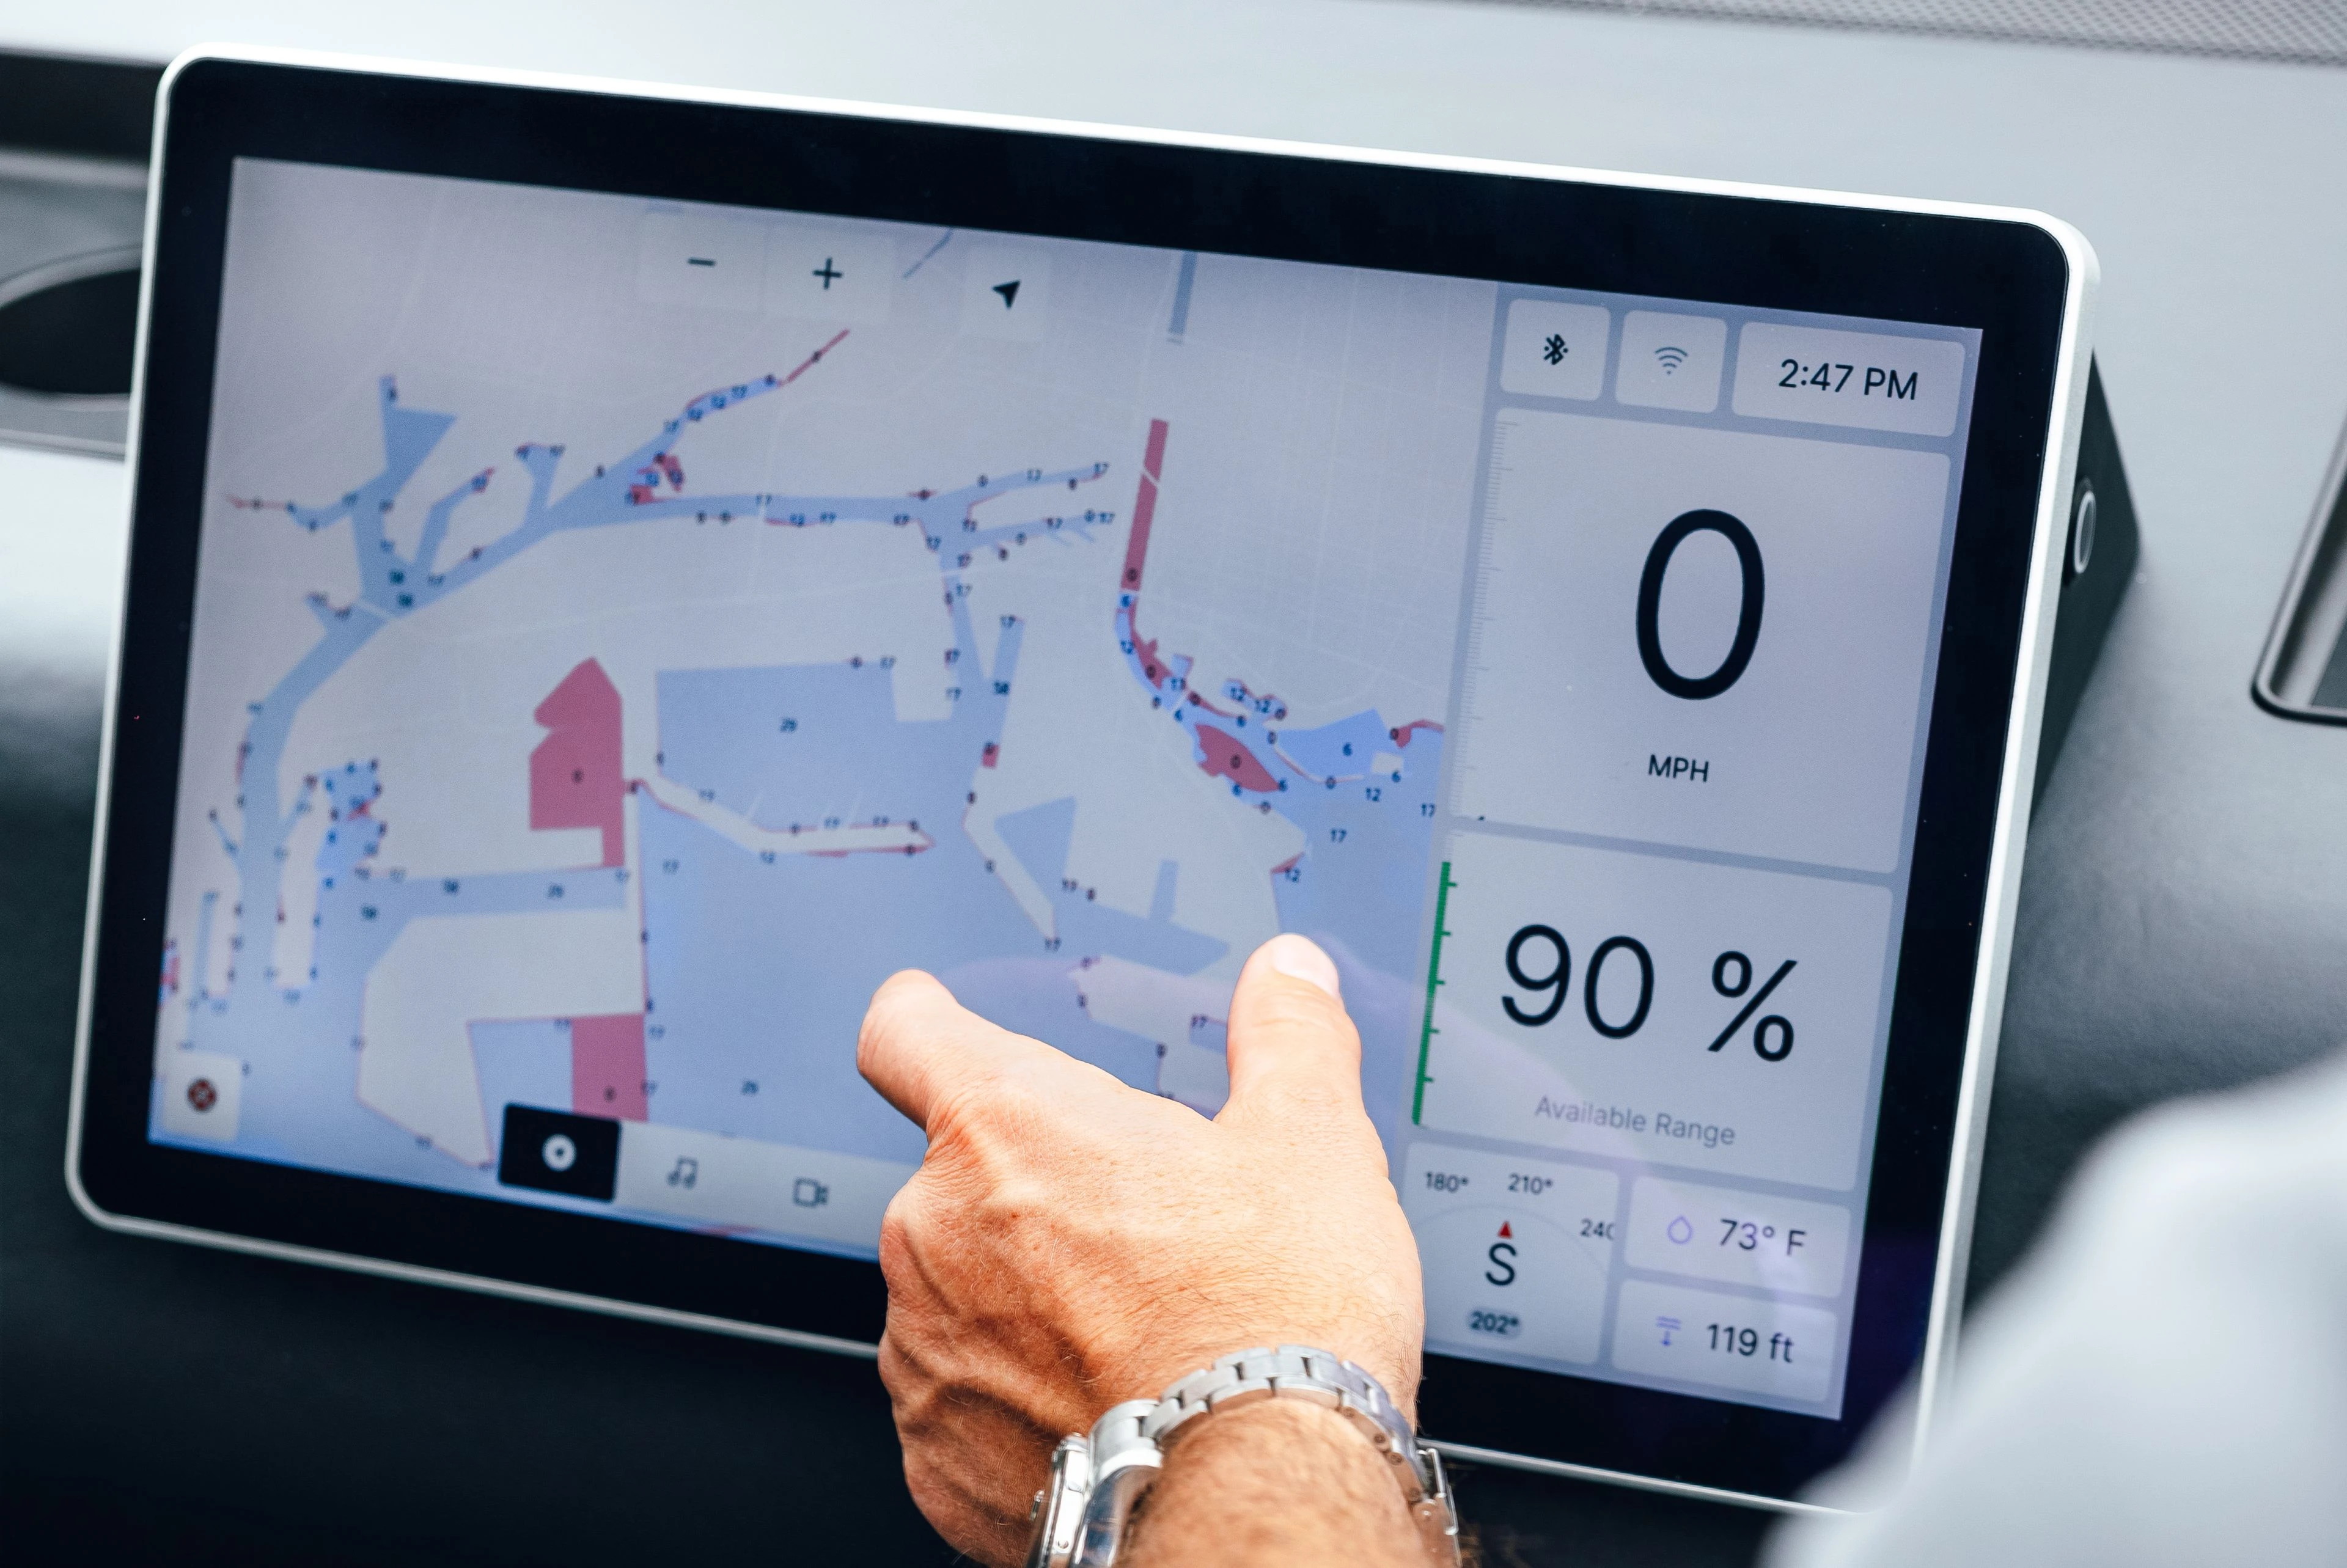 The Coolest Touchscreen On the Water